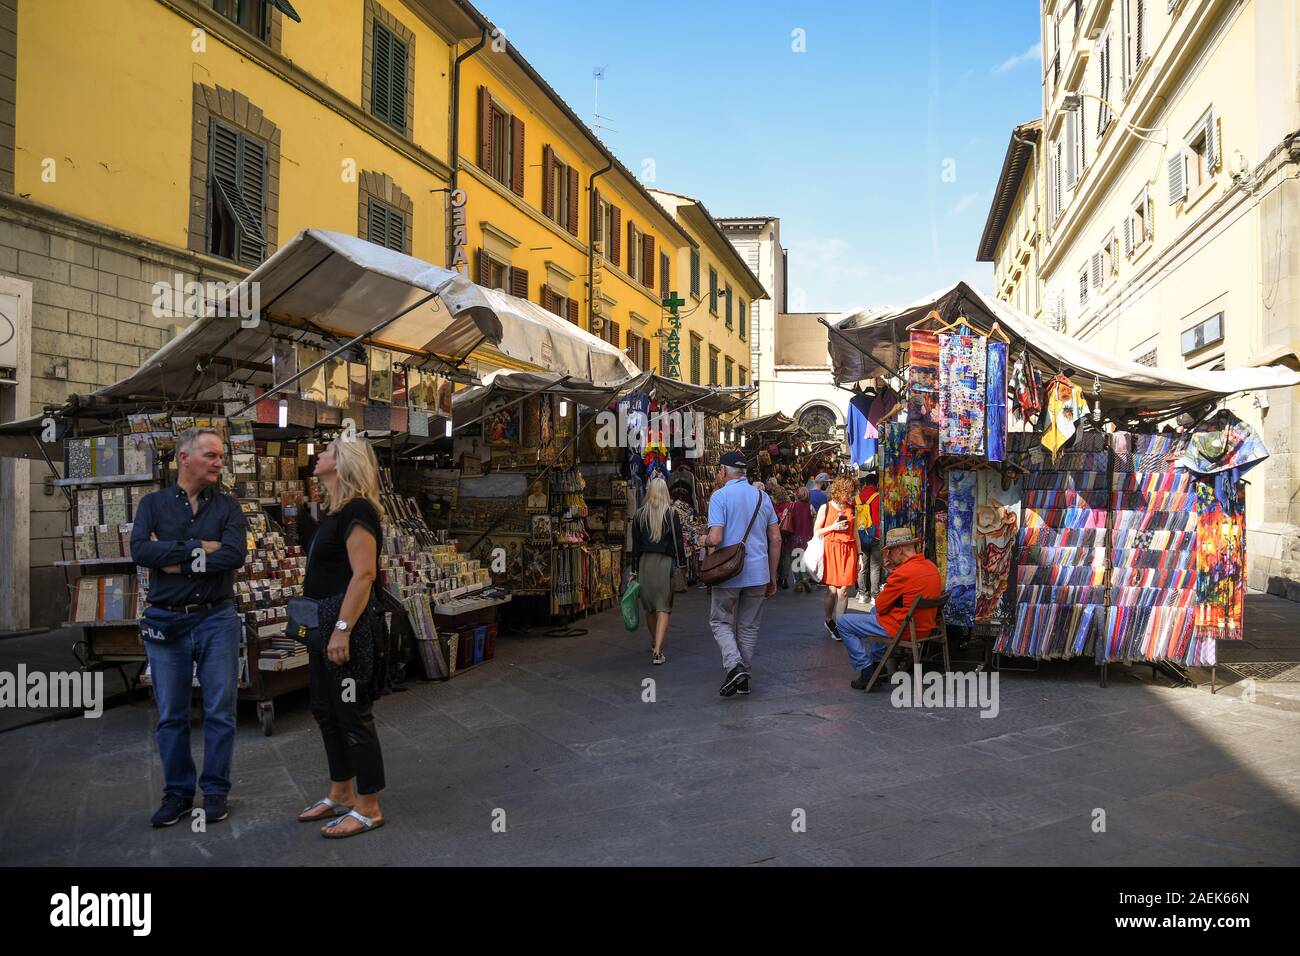 View of the San Lorenzo street market with stalls selling leather goods, silk ties and souvenirs in the historic centre of Florence, Tuscany, Italy Stock Photo